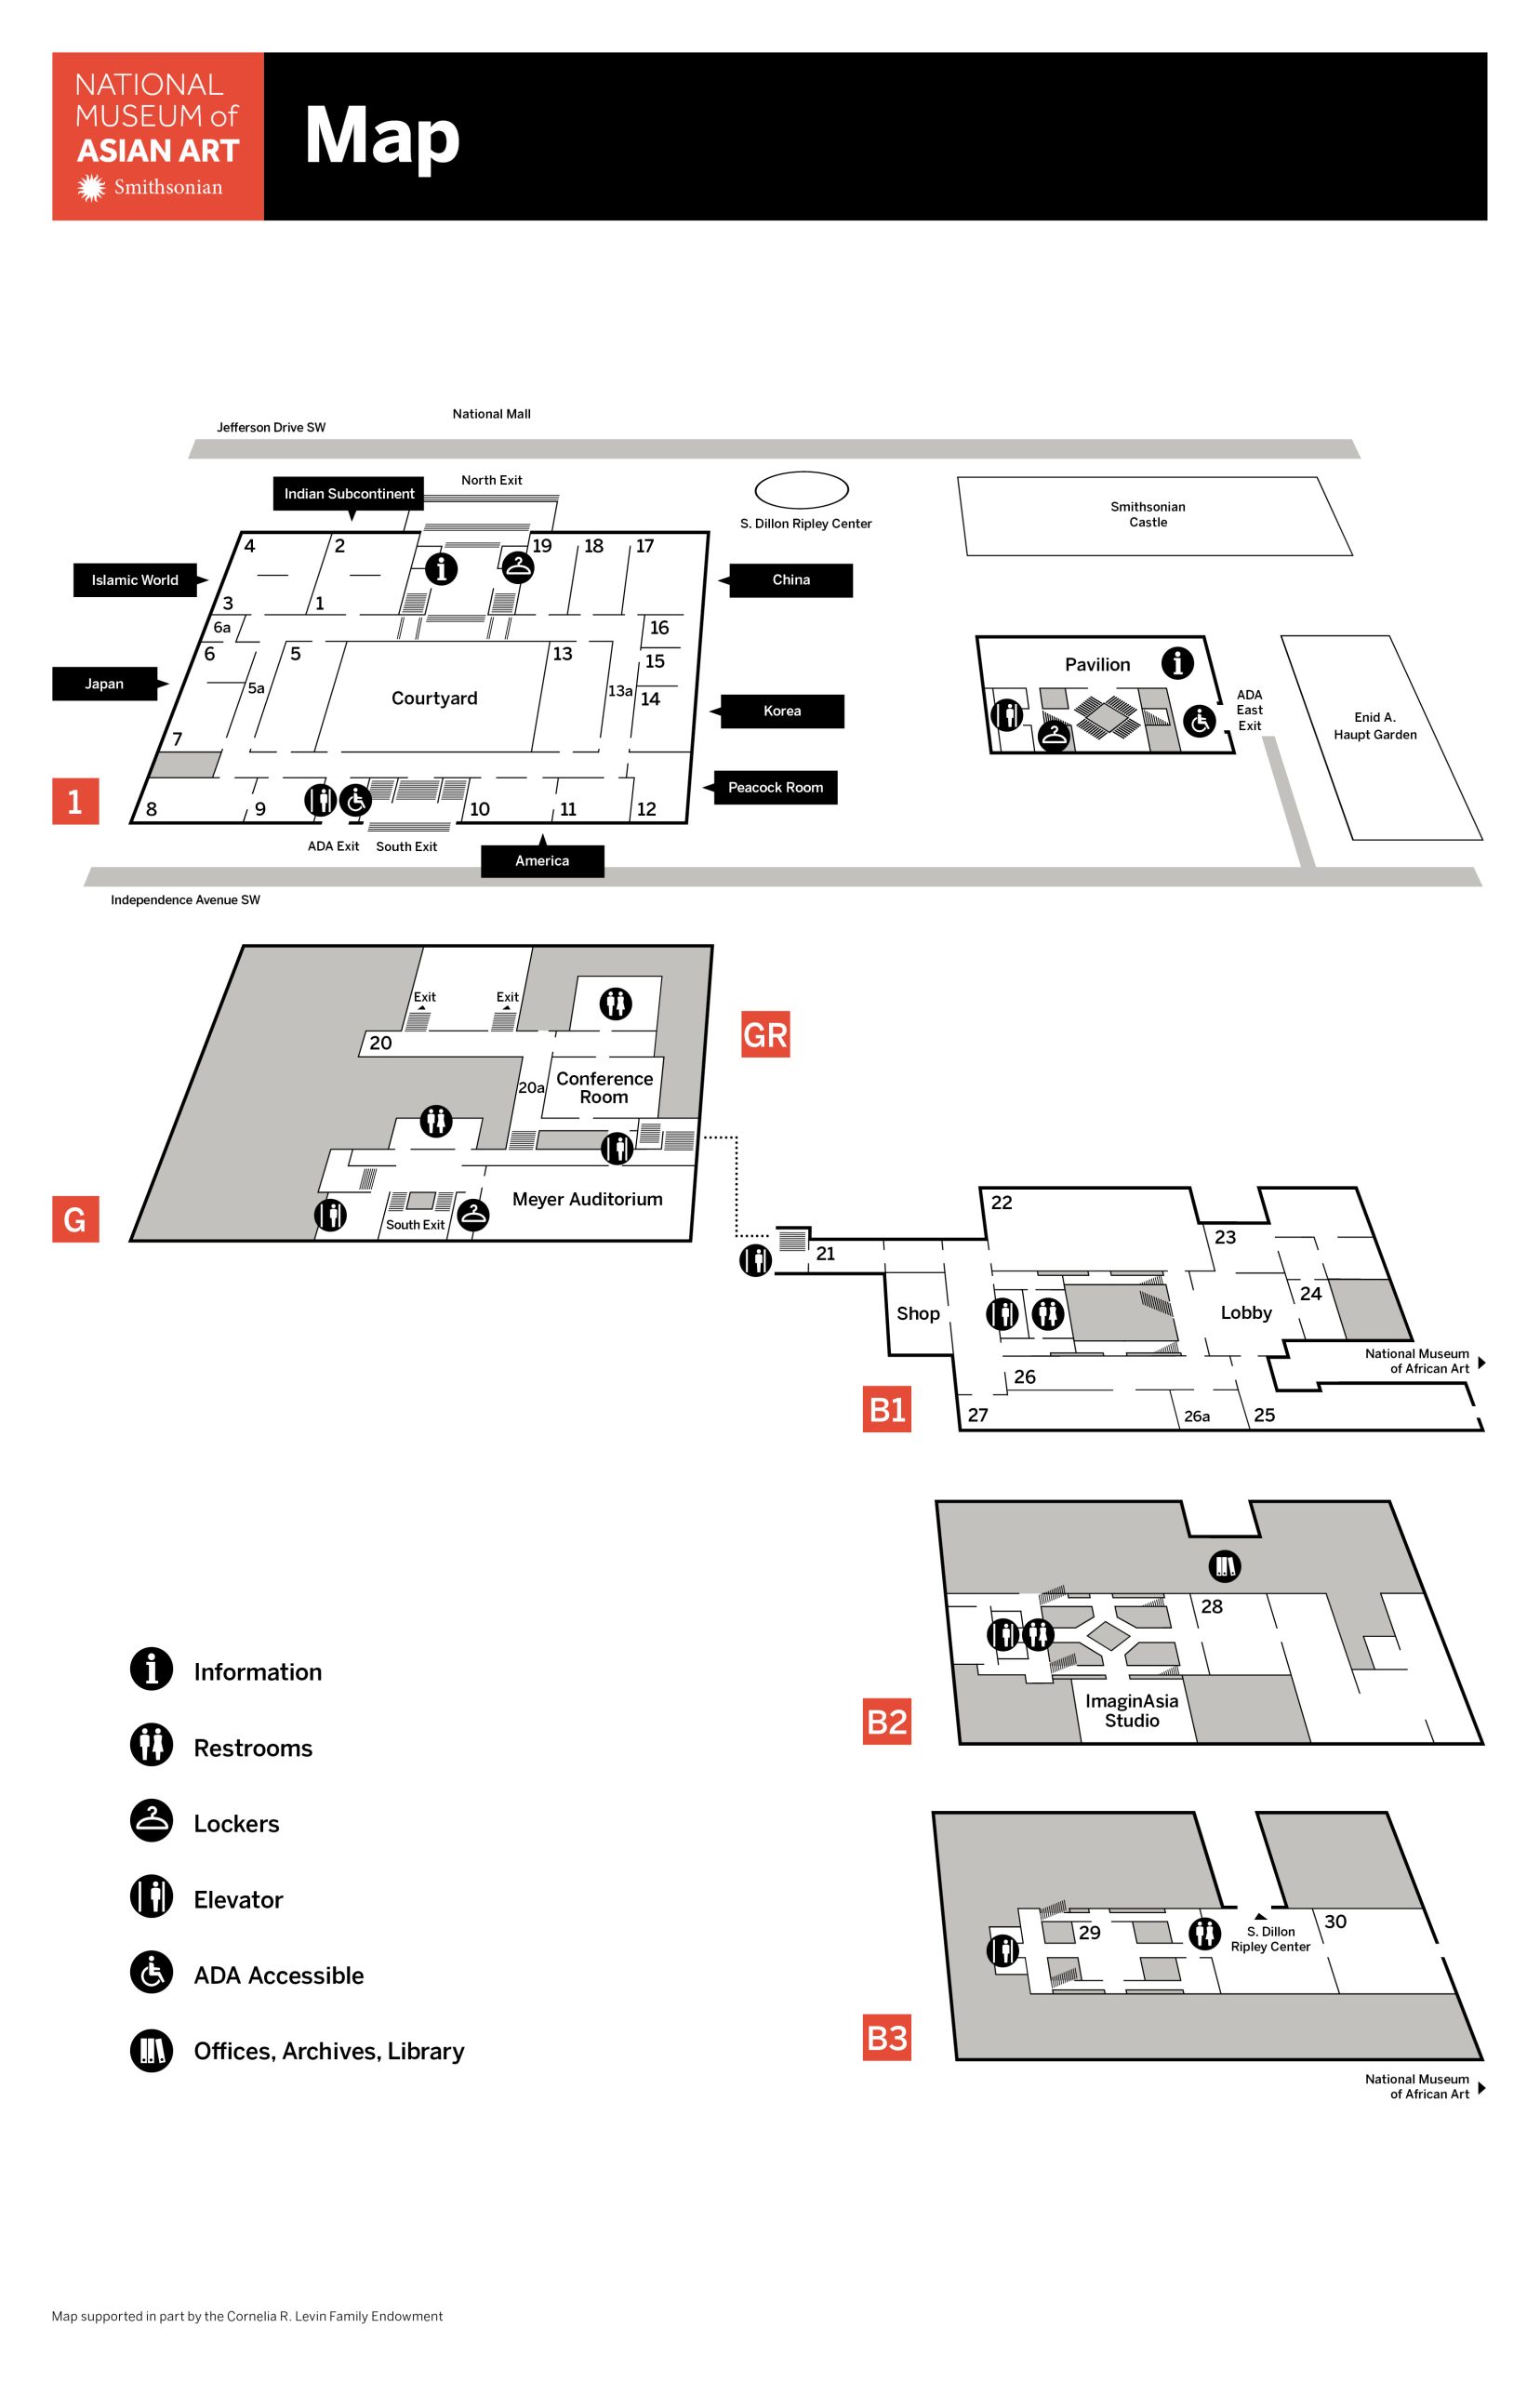 map of national museum of asian art (nmaa) freer and sackler galleries